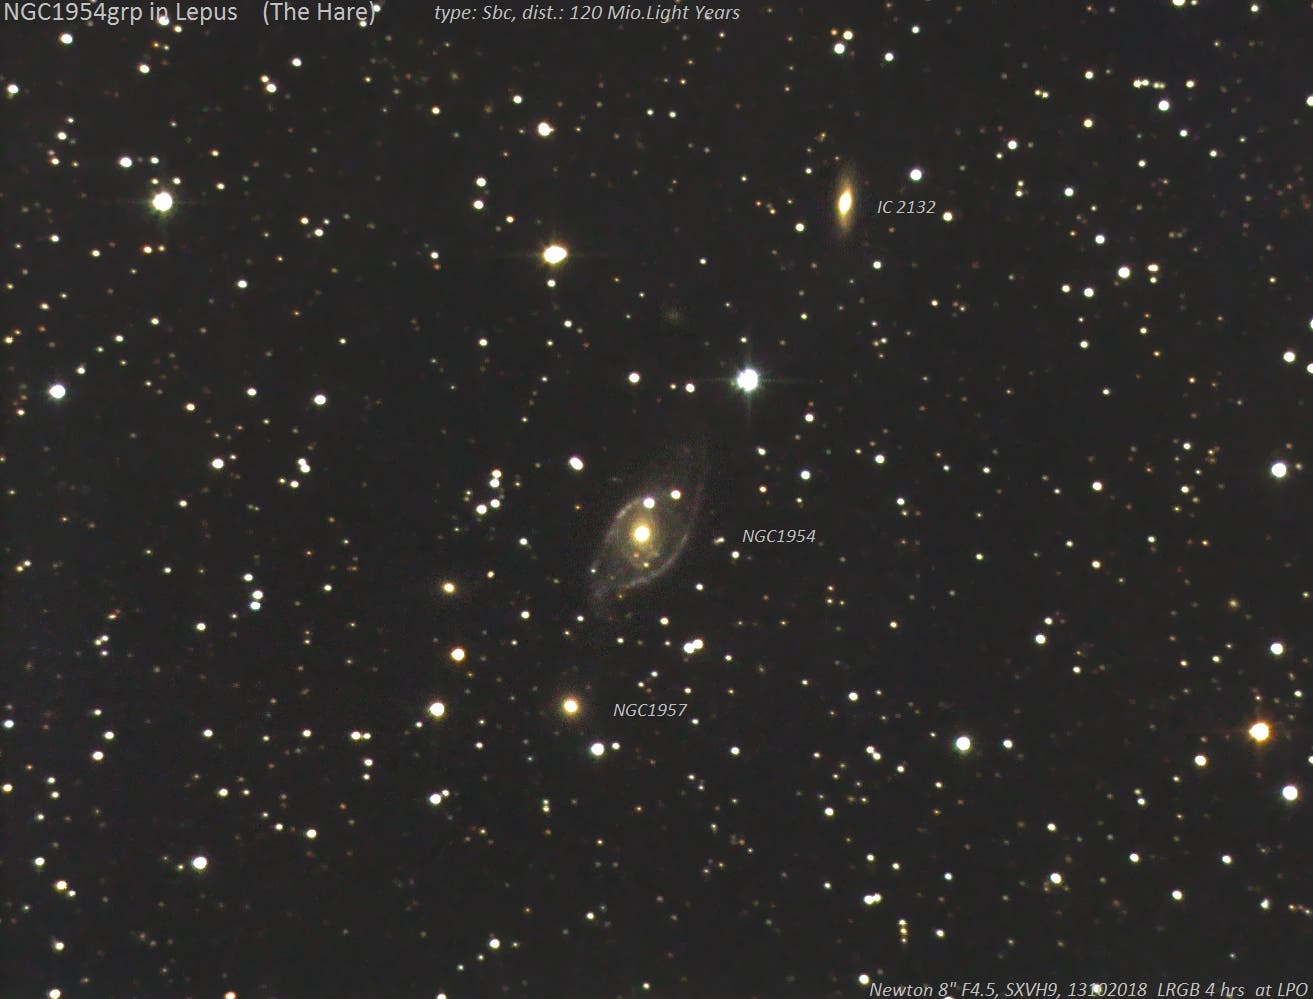 NGC 1954 group in Lepus